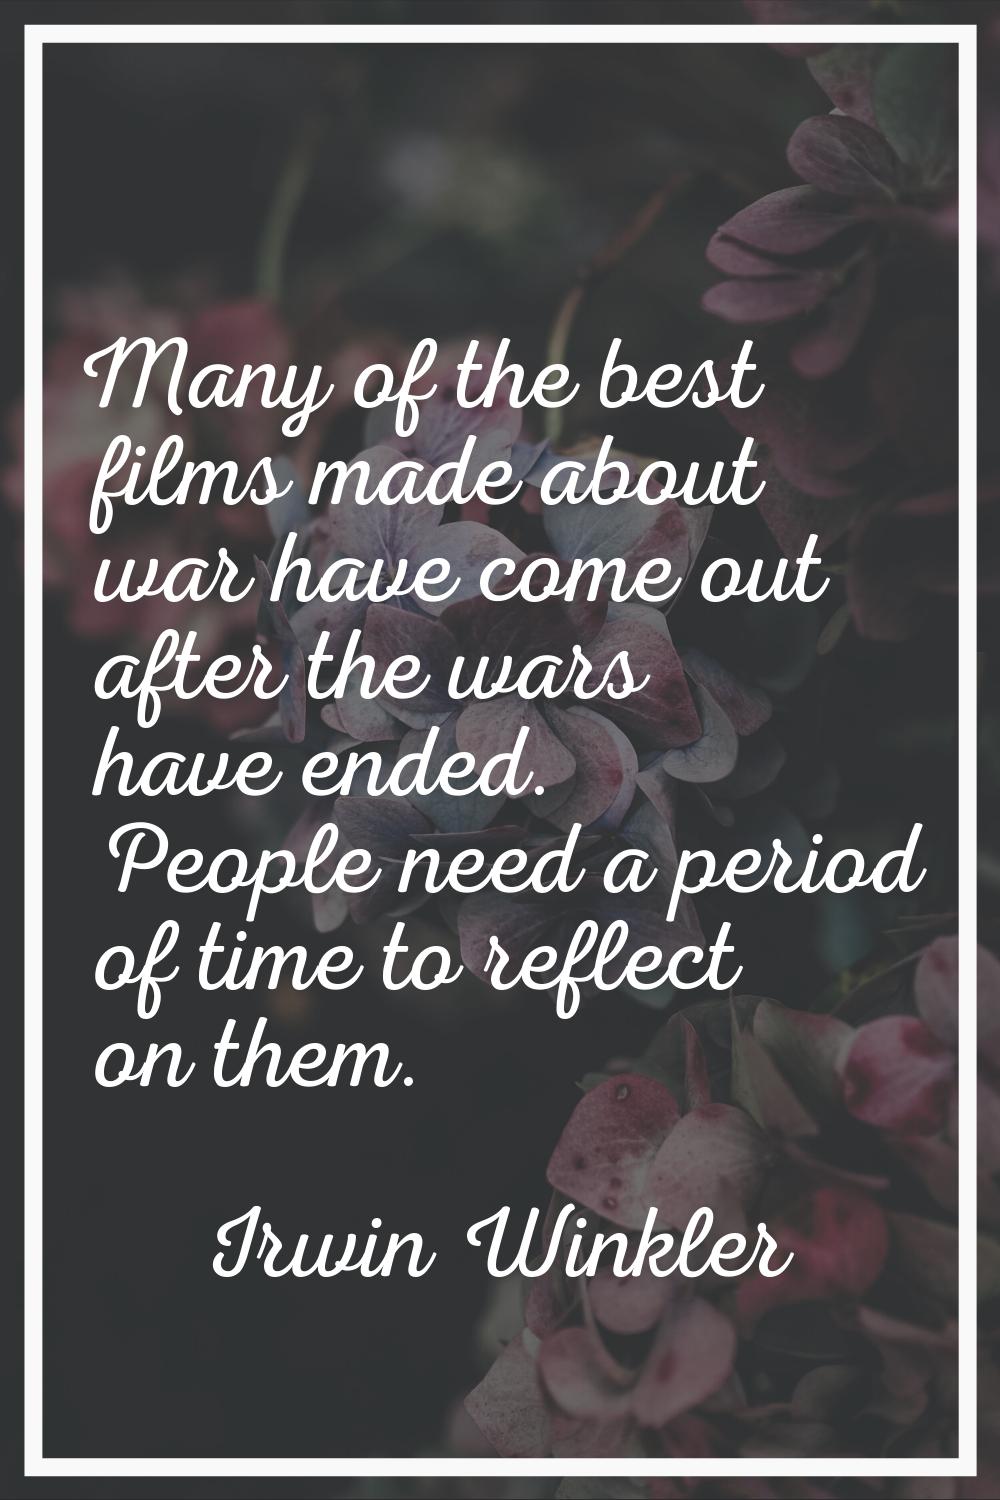 Many of the best films made about war have come out after the wars have ended. People need a period